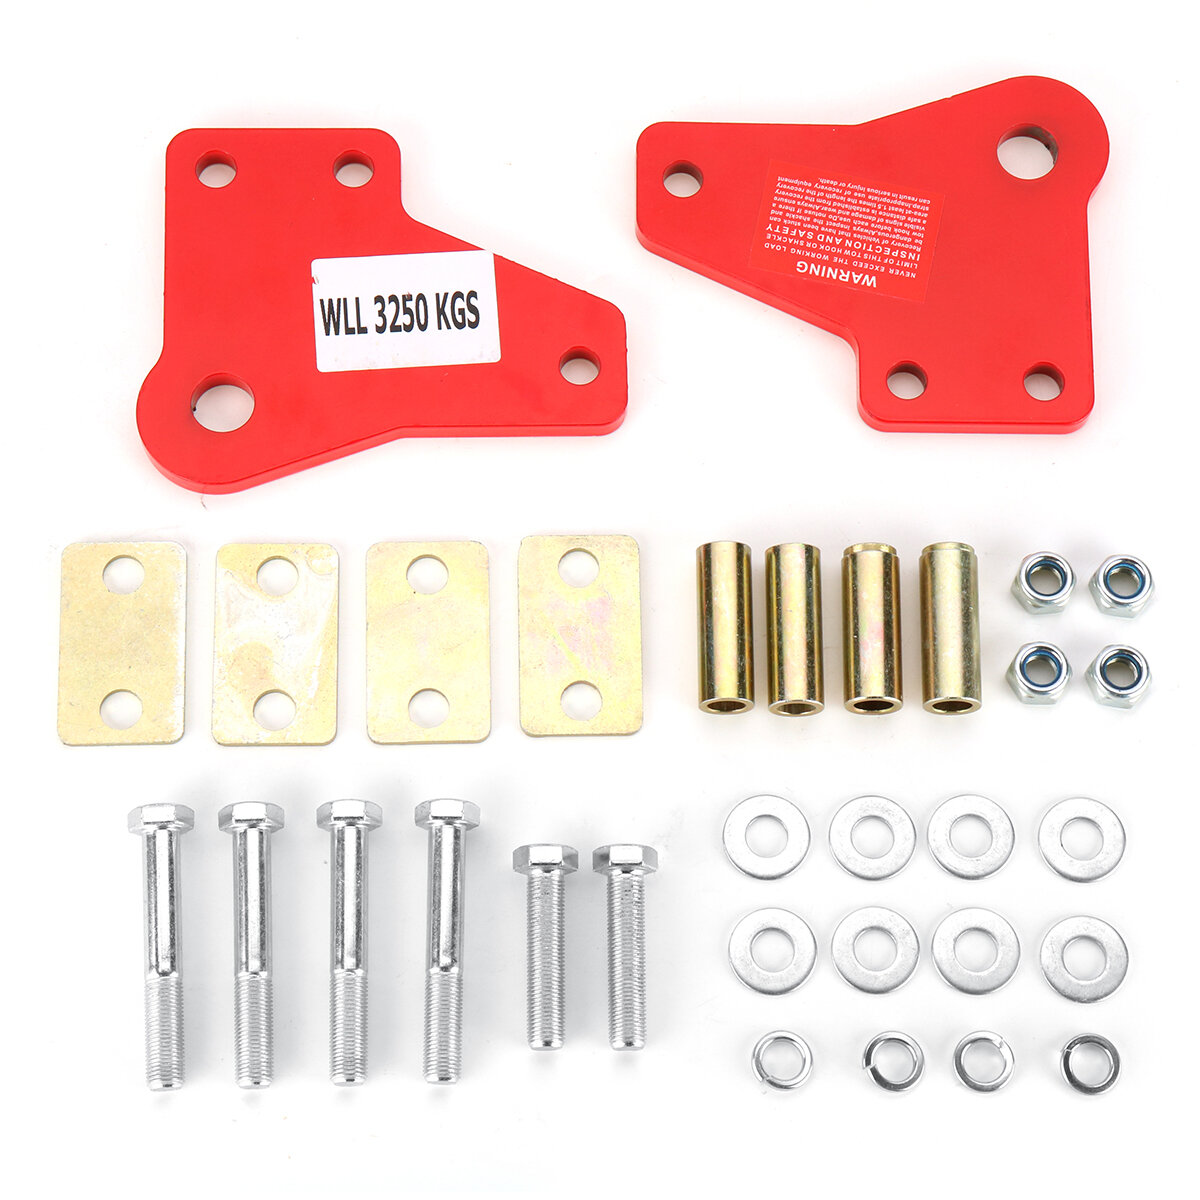 2pcs Front Recovery Tow Point Kit Pull Starter Kits 3250 KG For Toyota Hilux KUN26 N70 2005-2015